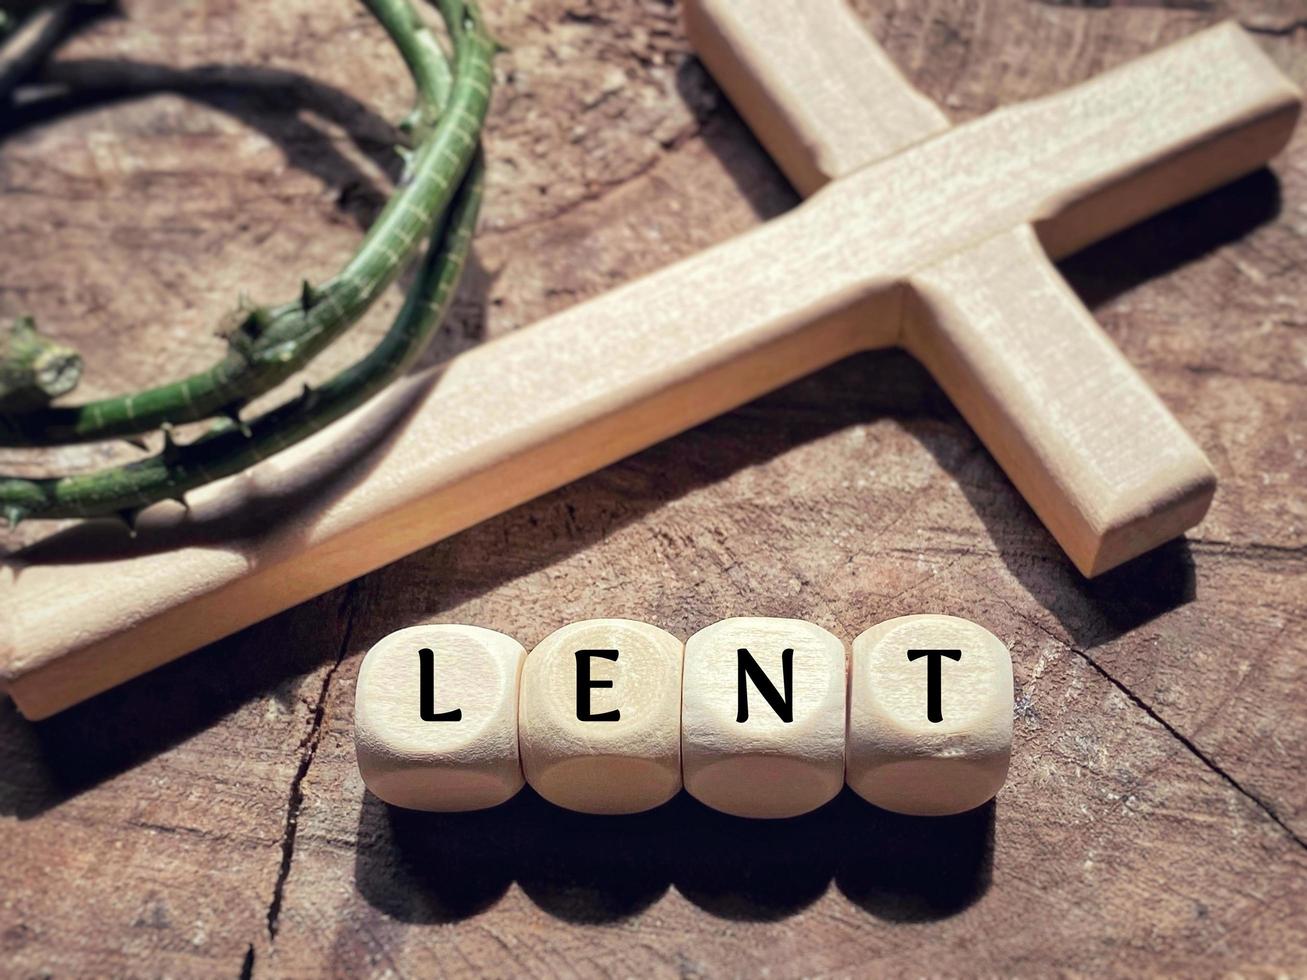 Lent Season,Holy Week and Good Friday concepts - lent text on wooden cubes in vintage background. Stock photo. photo